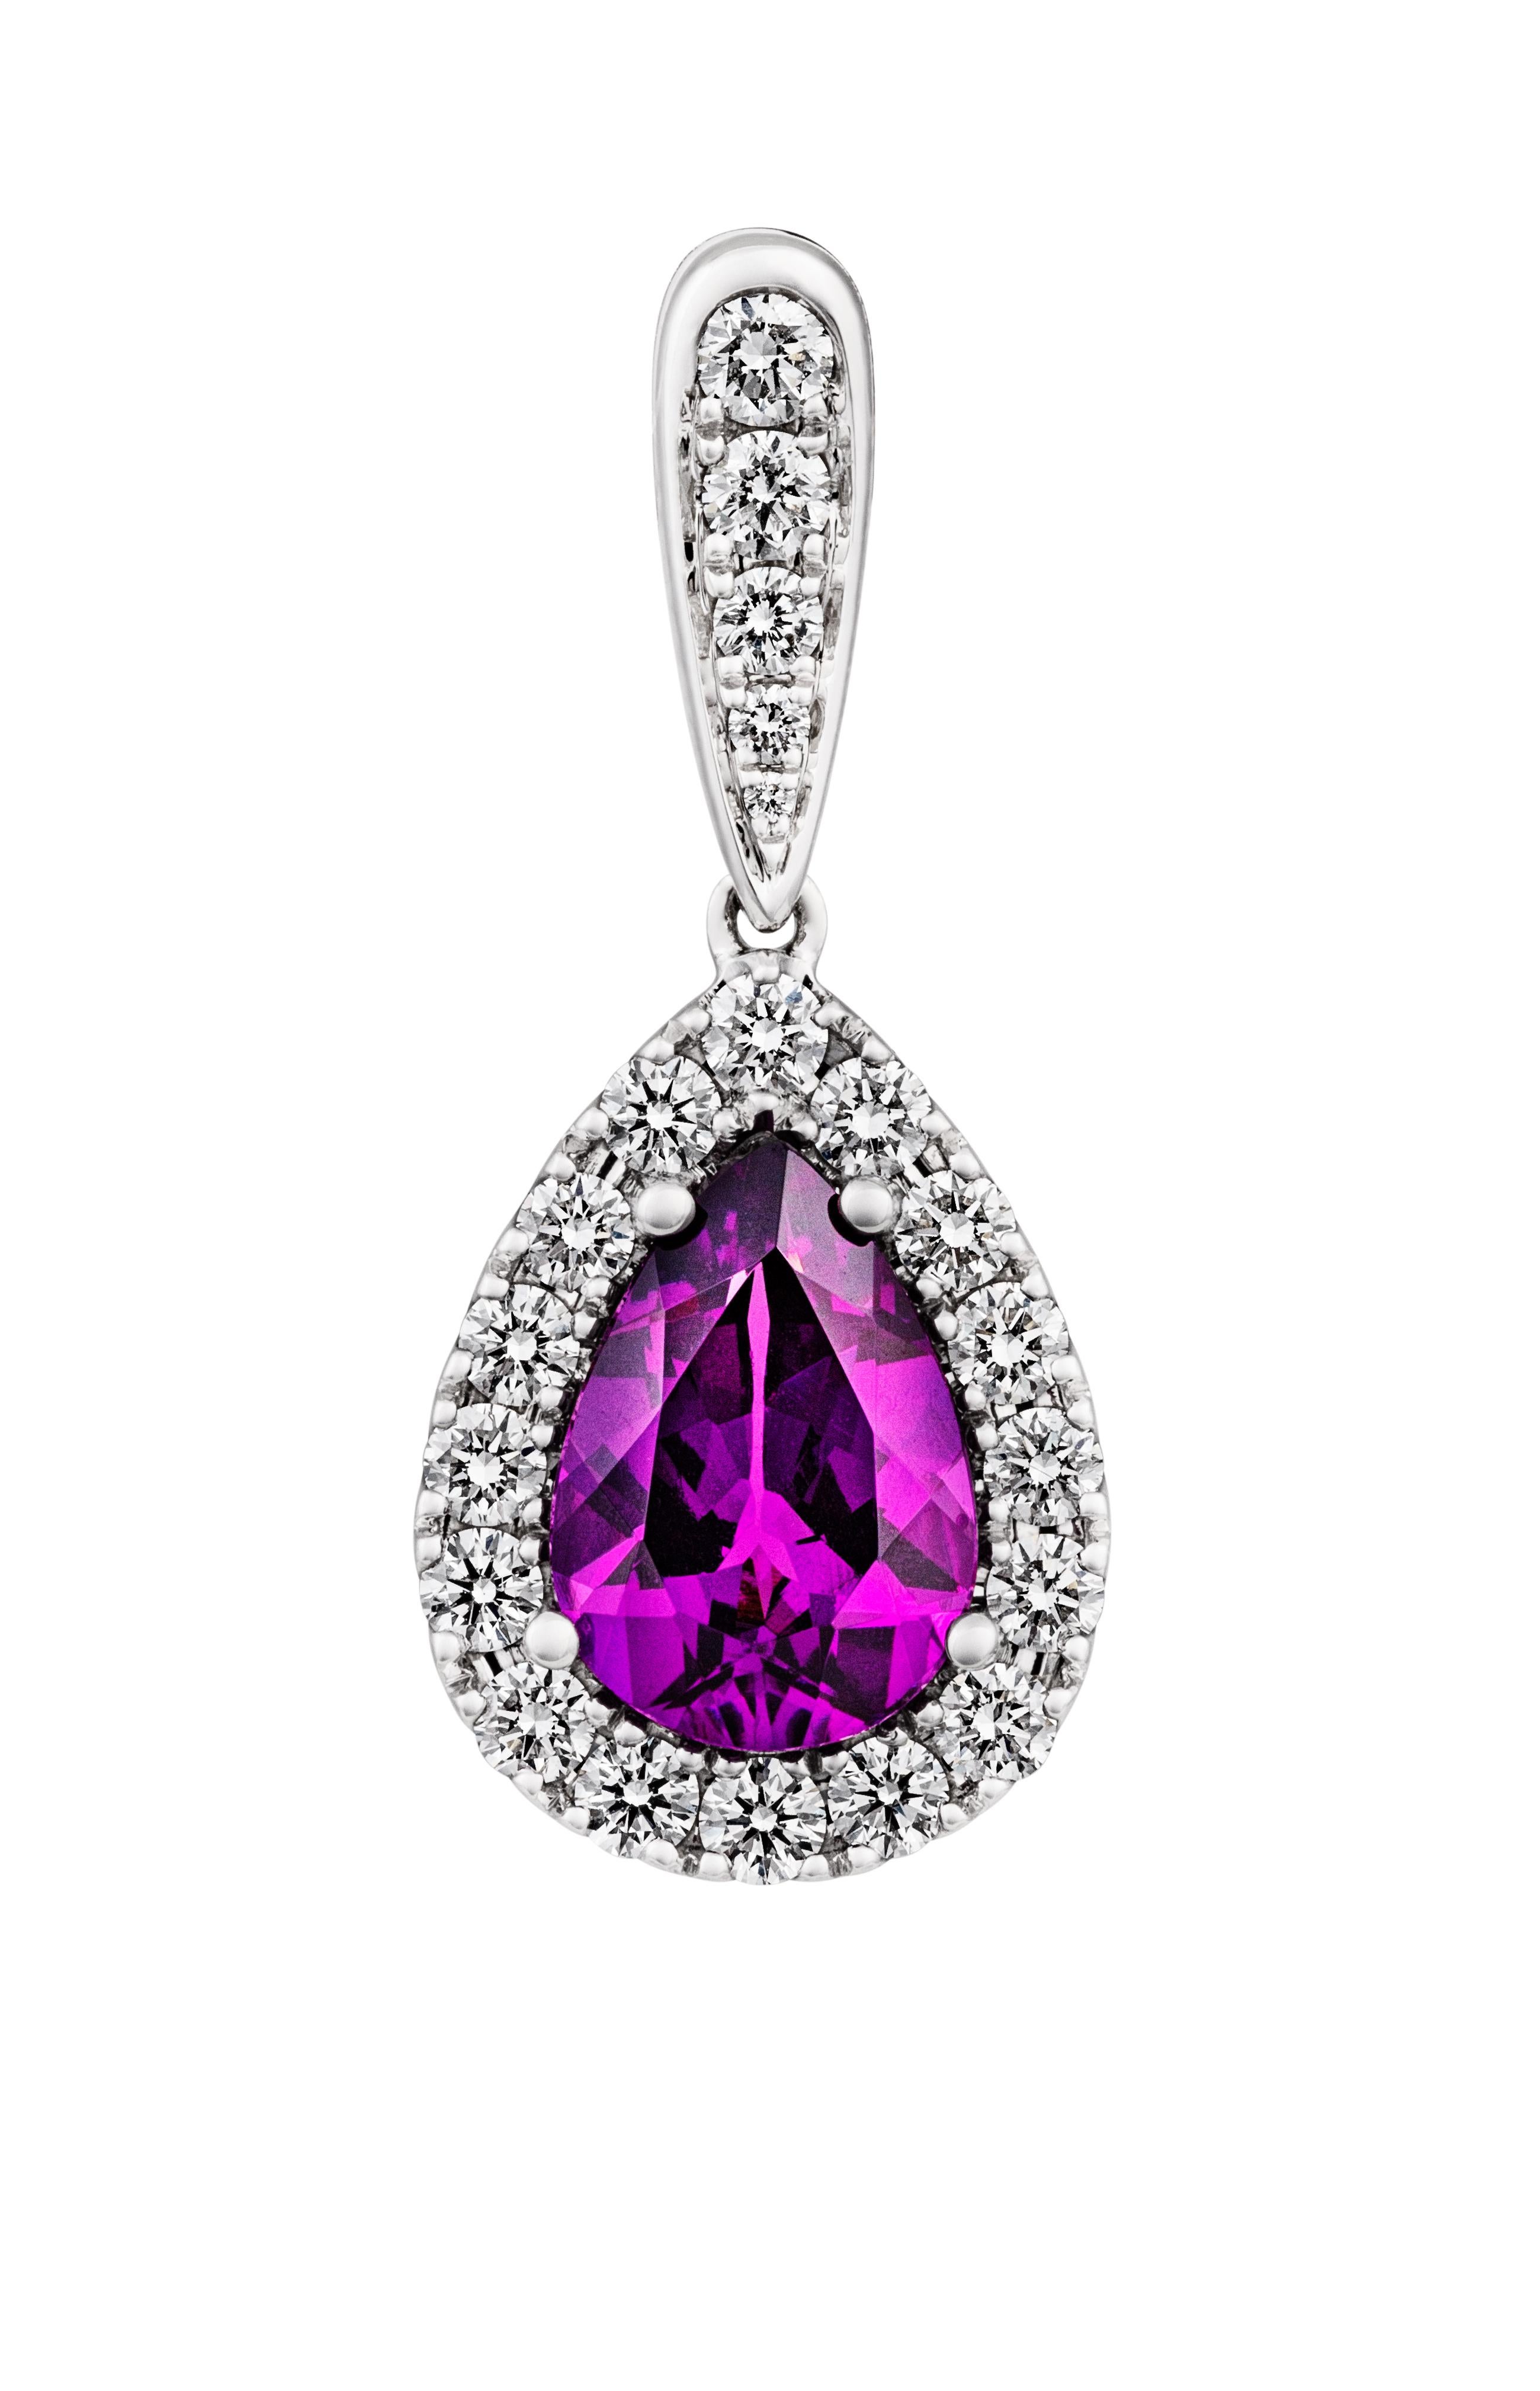 Contemporary 4.1cttw Pear-Shaped Amethyst 1.19cttw Diamond 18kt White Gold Drop Earrings For Sale